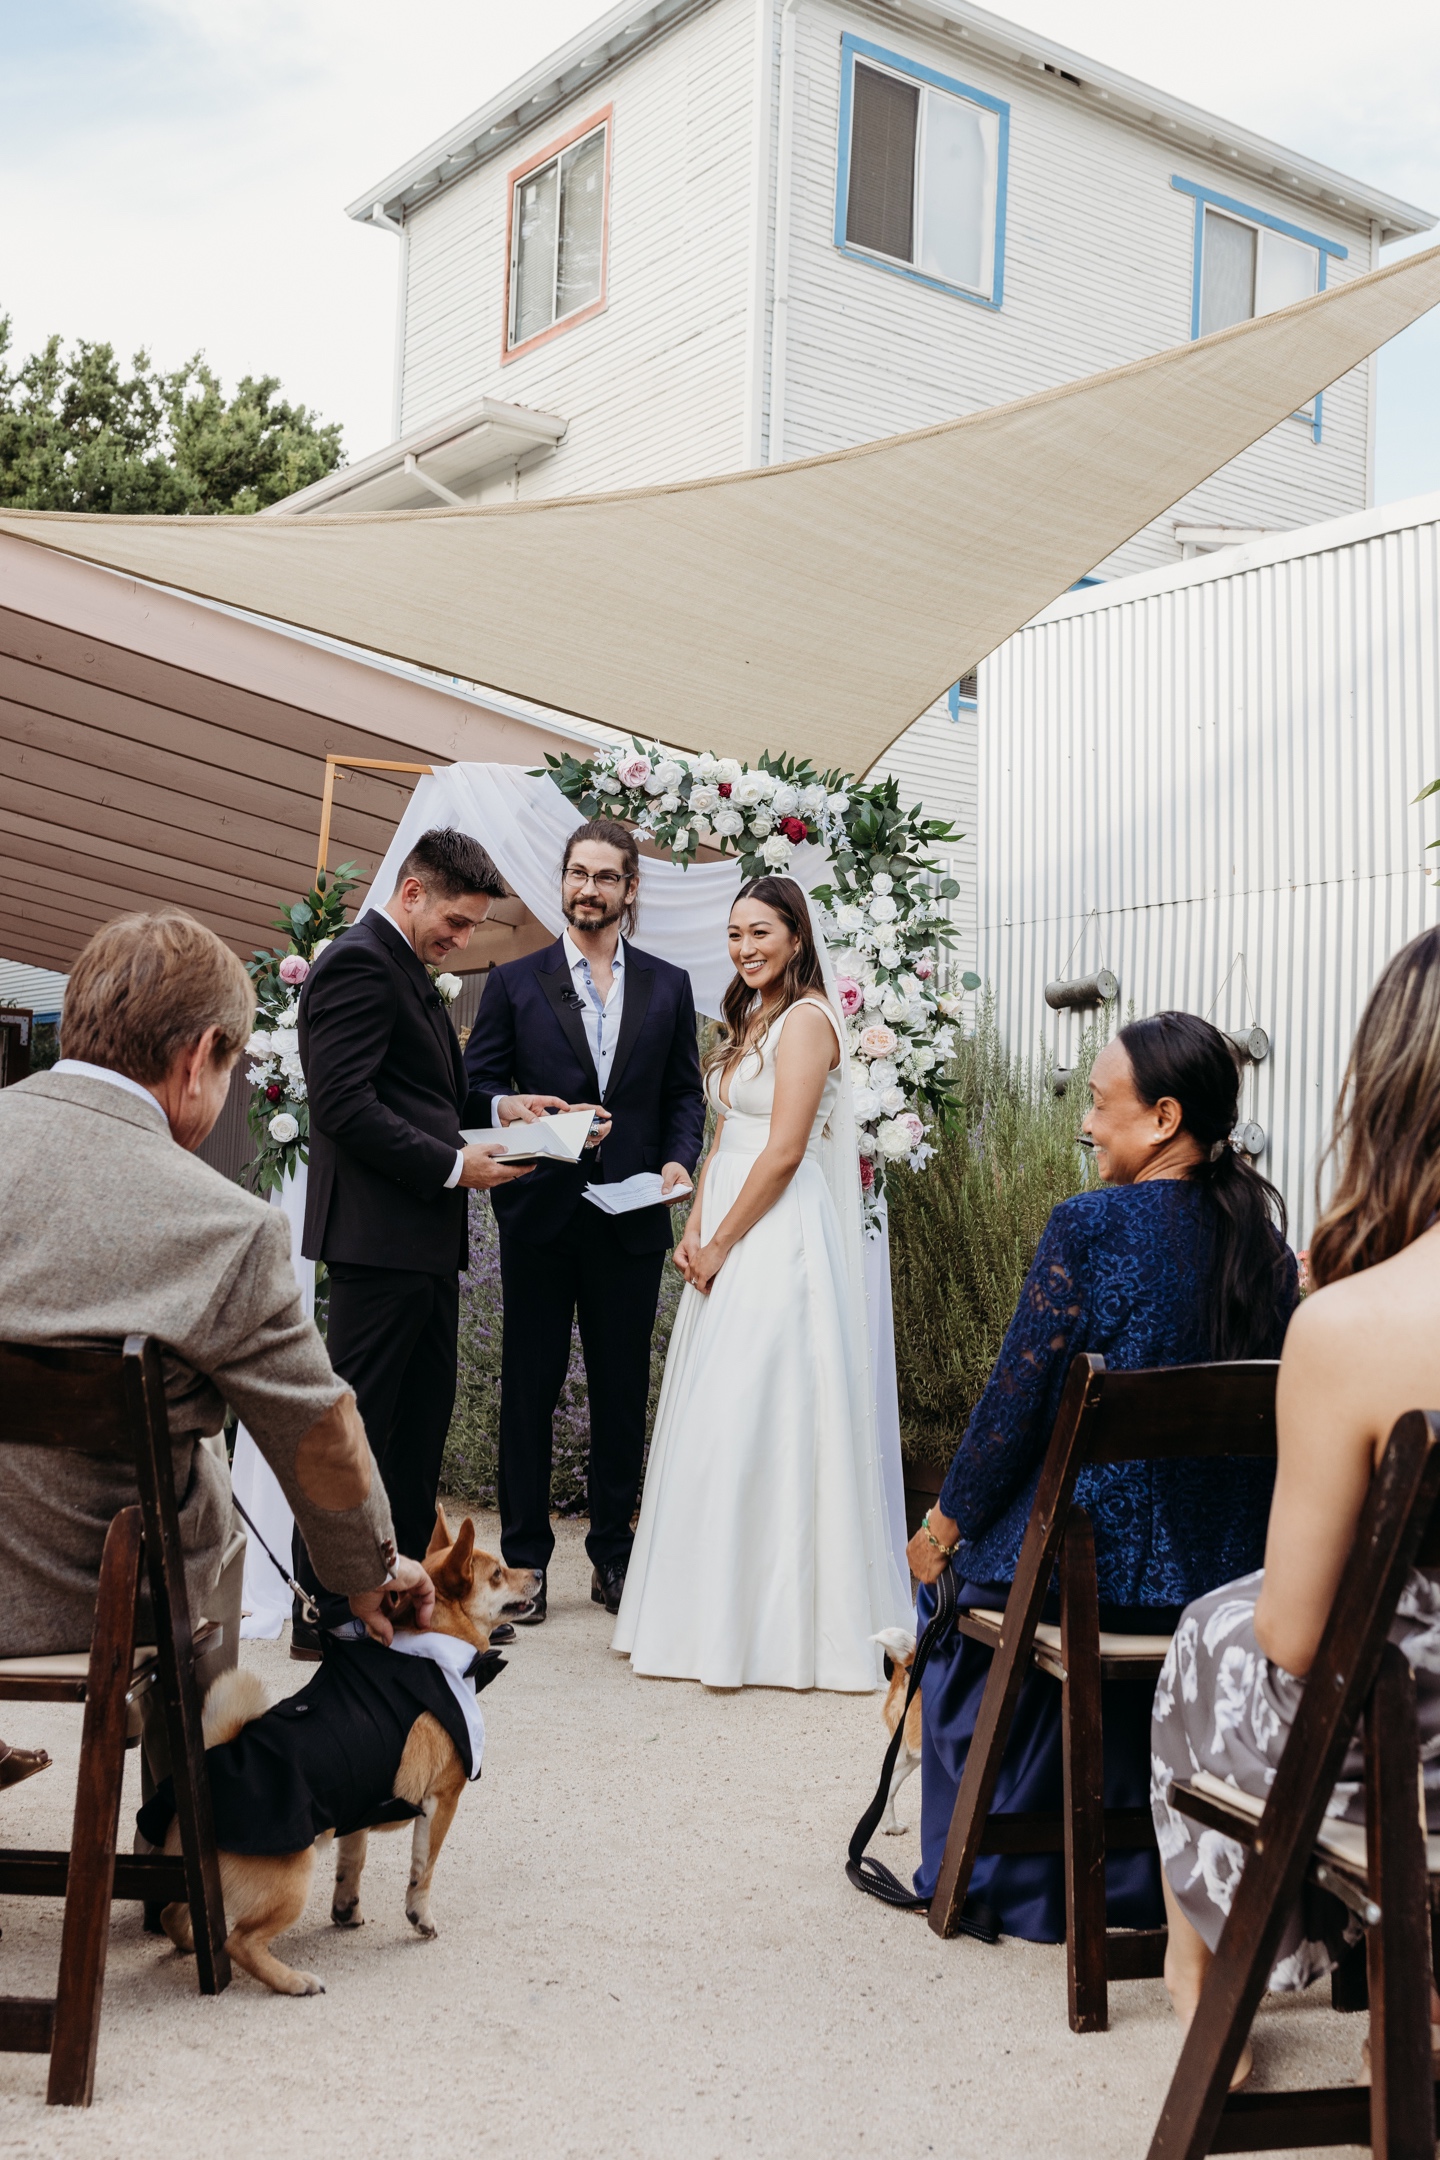 Bride and groom exchange vows during their Prickle Pear wedding ceremony.